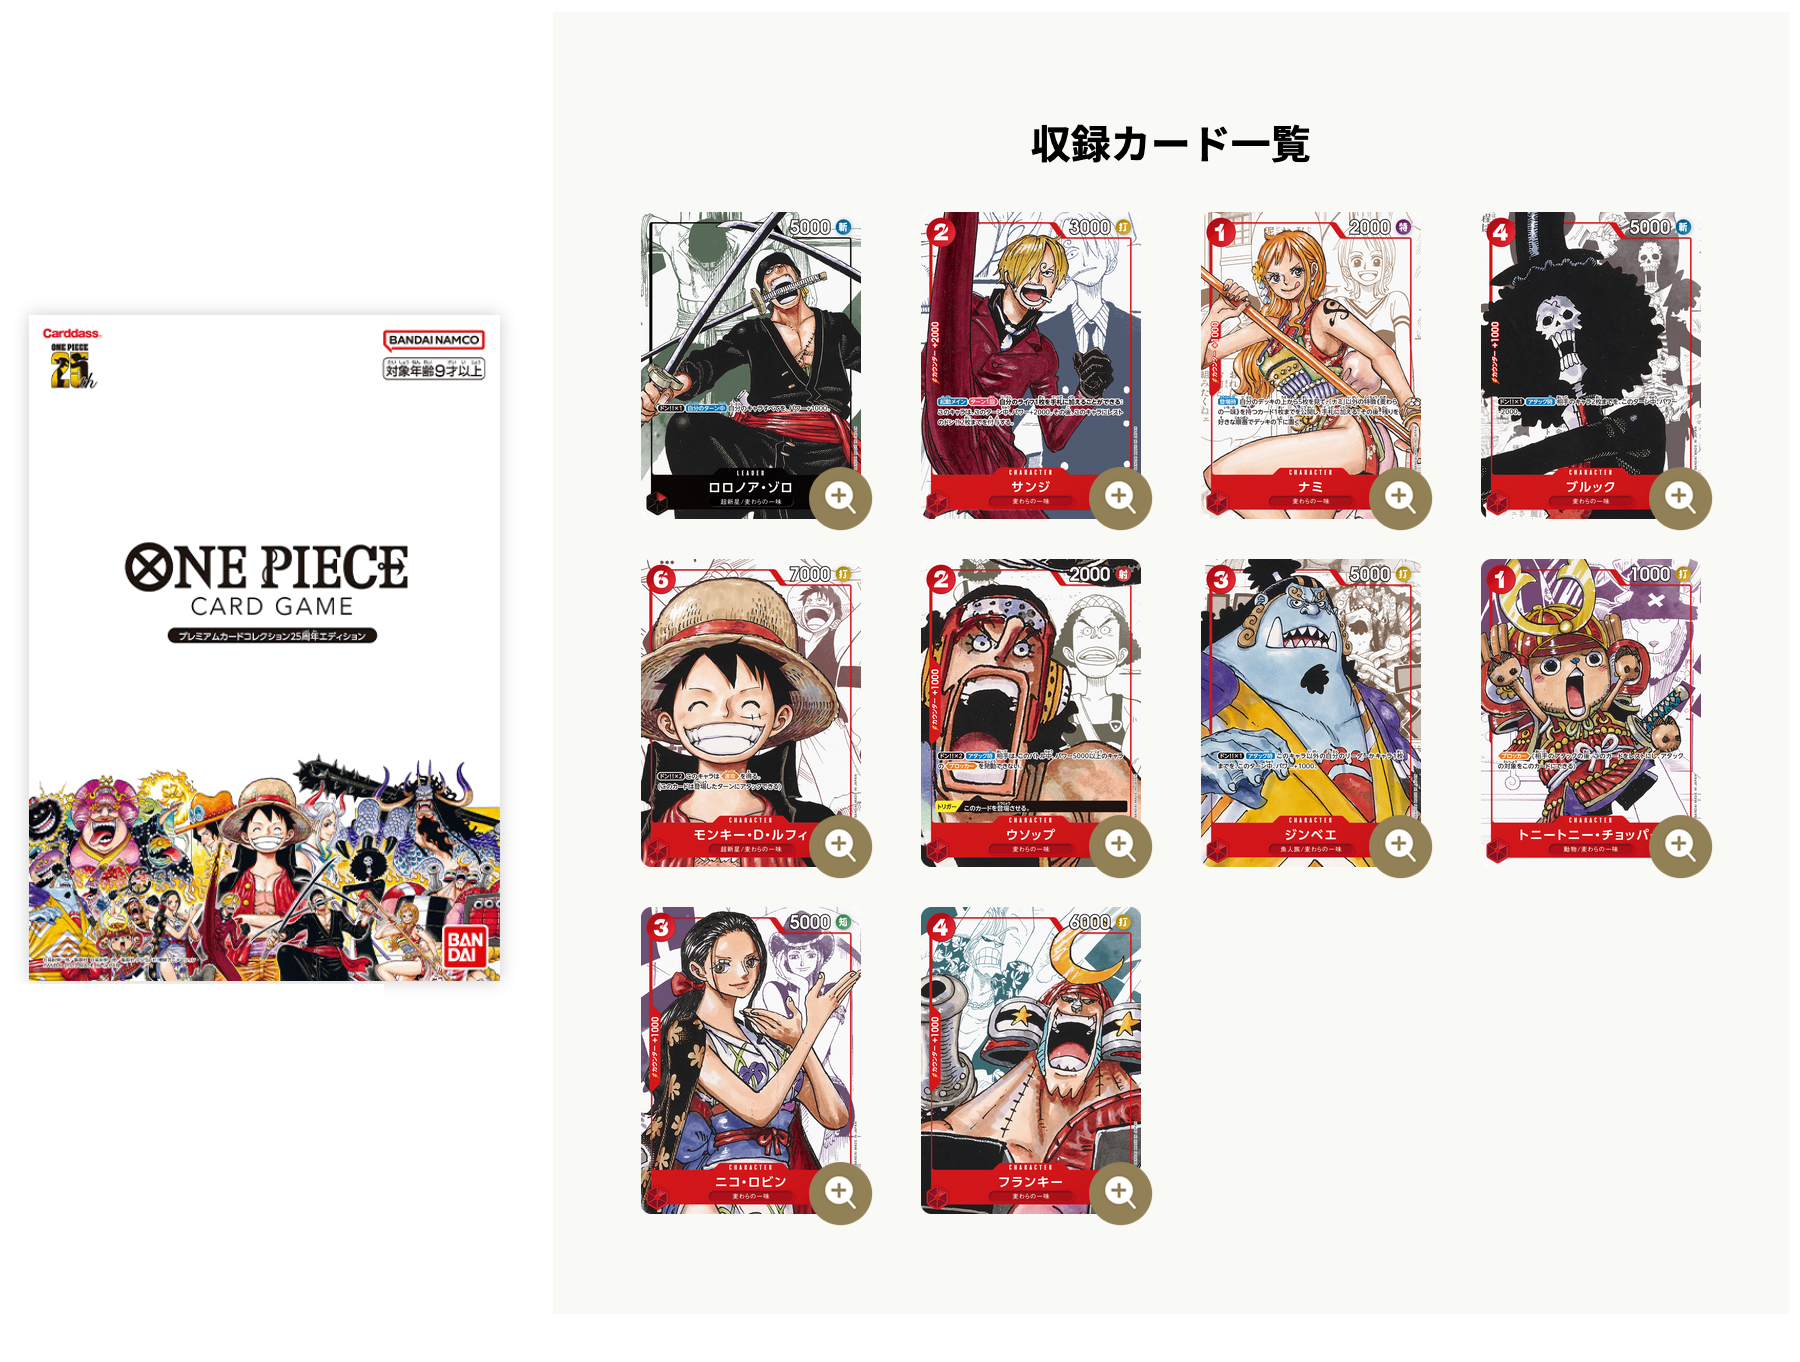 Carddass ONE PIECE CARD GAME PREMIUM CARD COLLECTION - ONE PIECE FILM